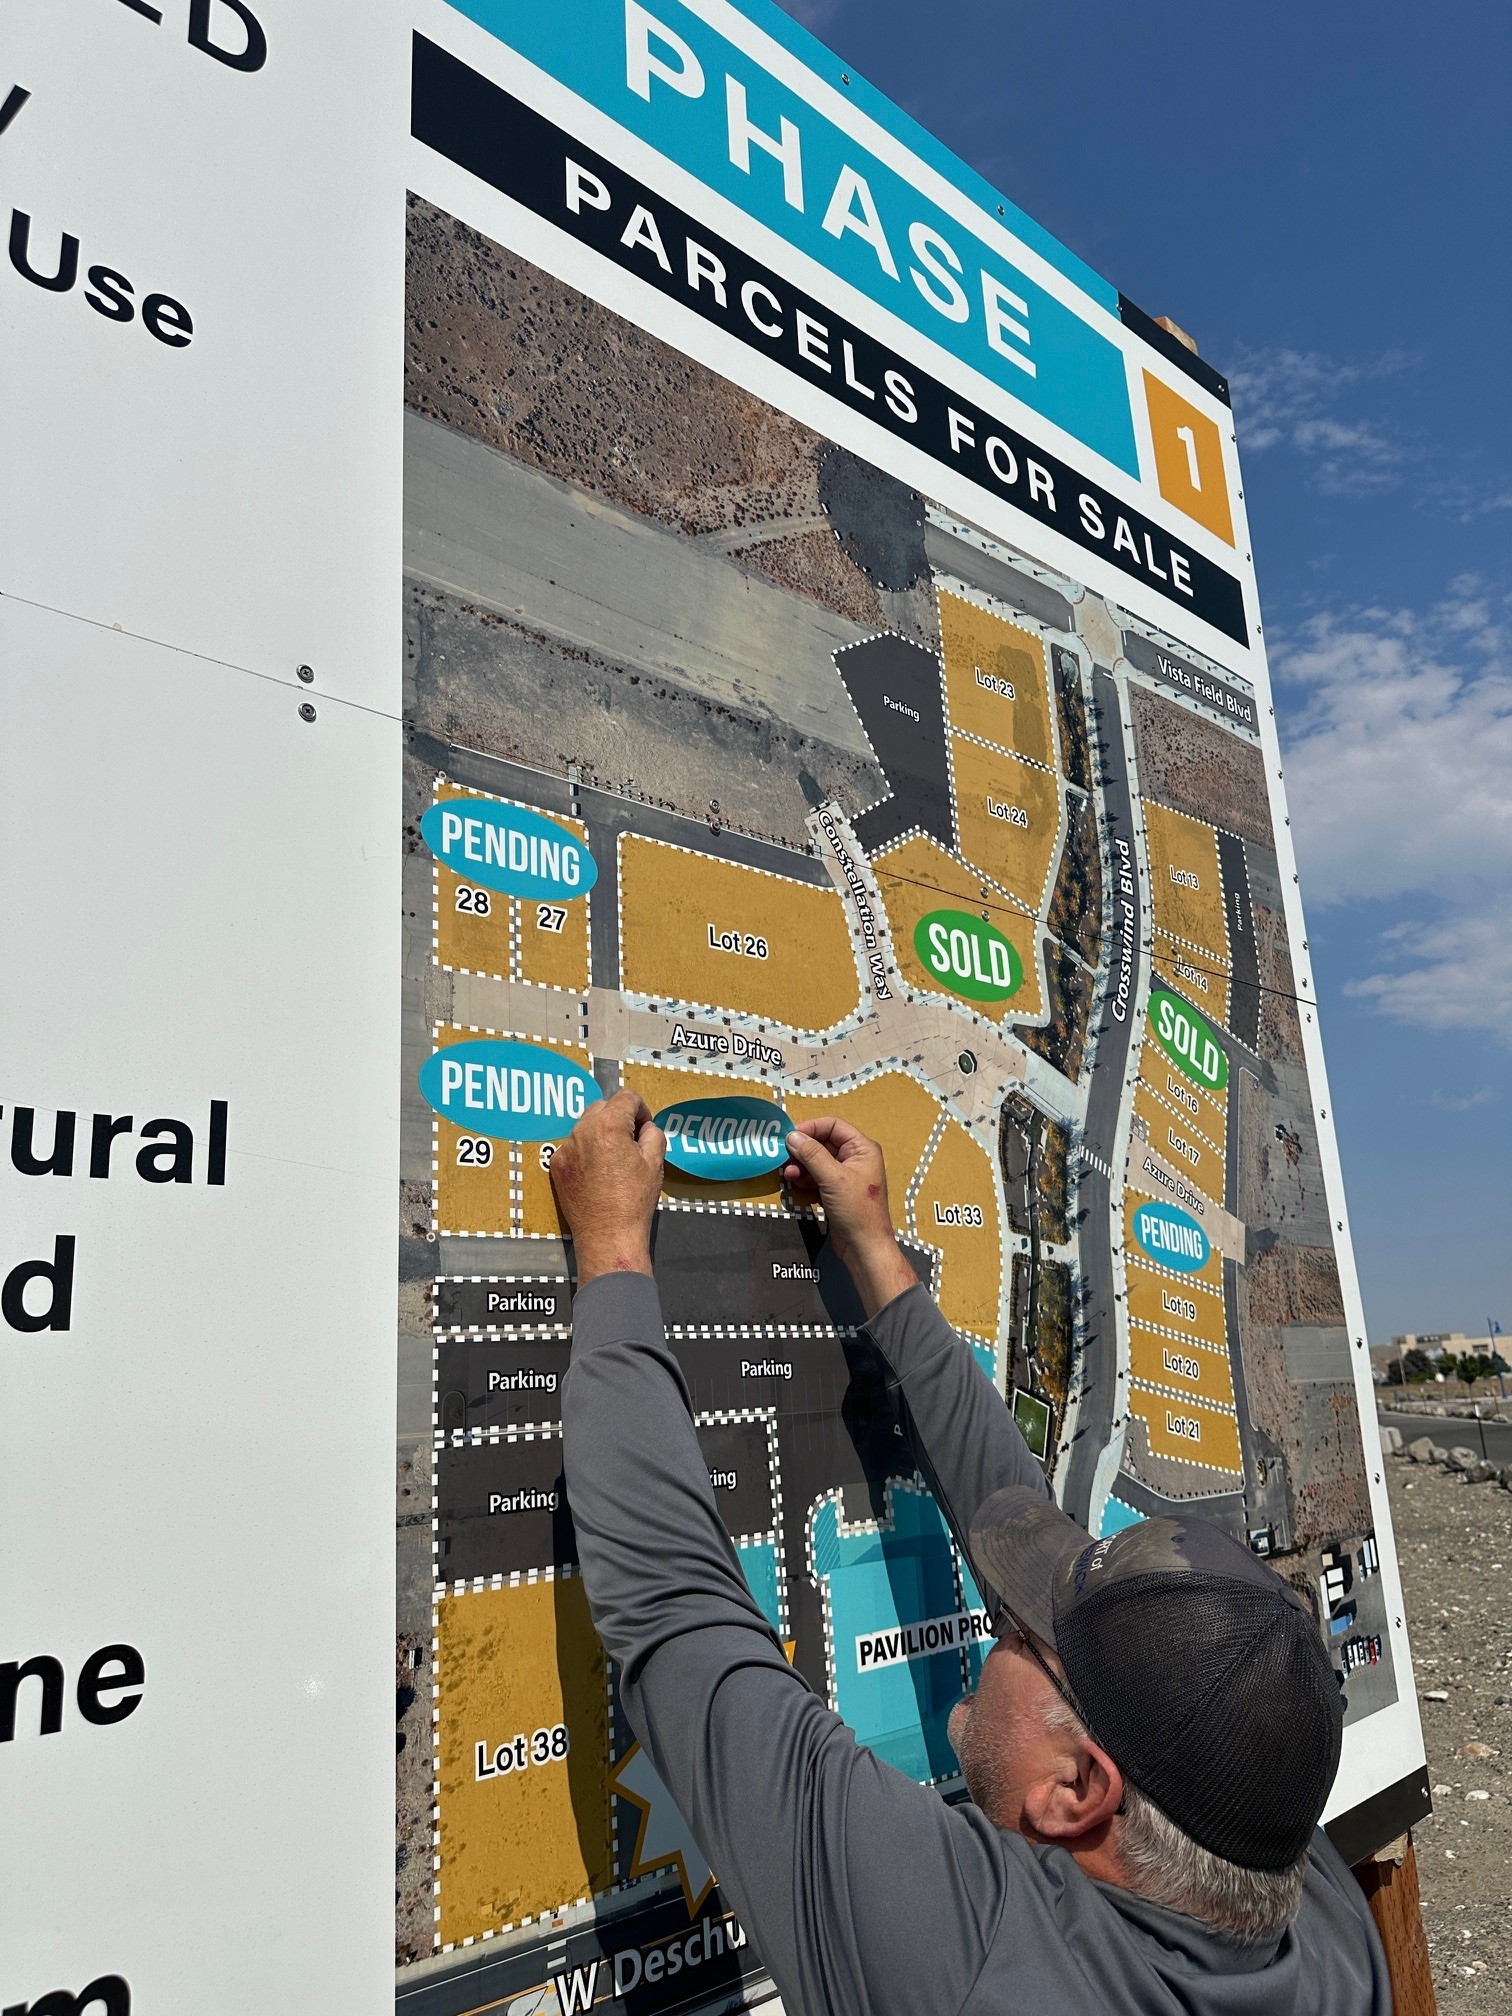 A Port team member adds a sticker to Lot 31 on the Vista Field phase 1 billboard, marking it as a pending sale.